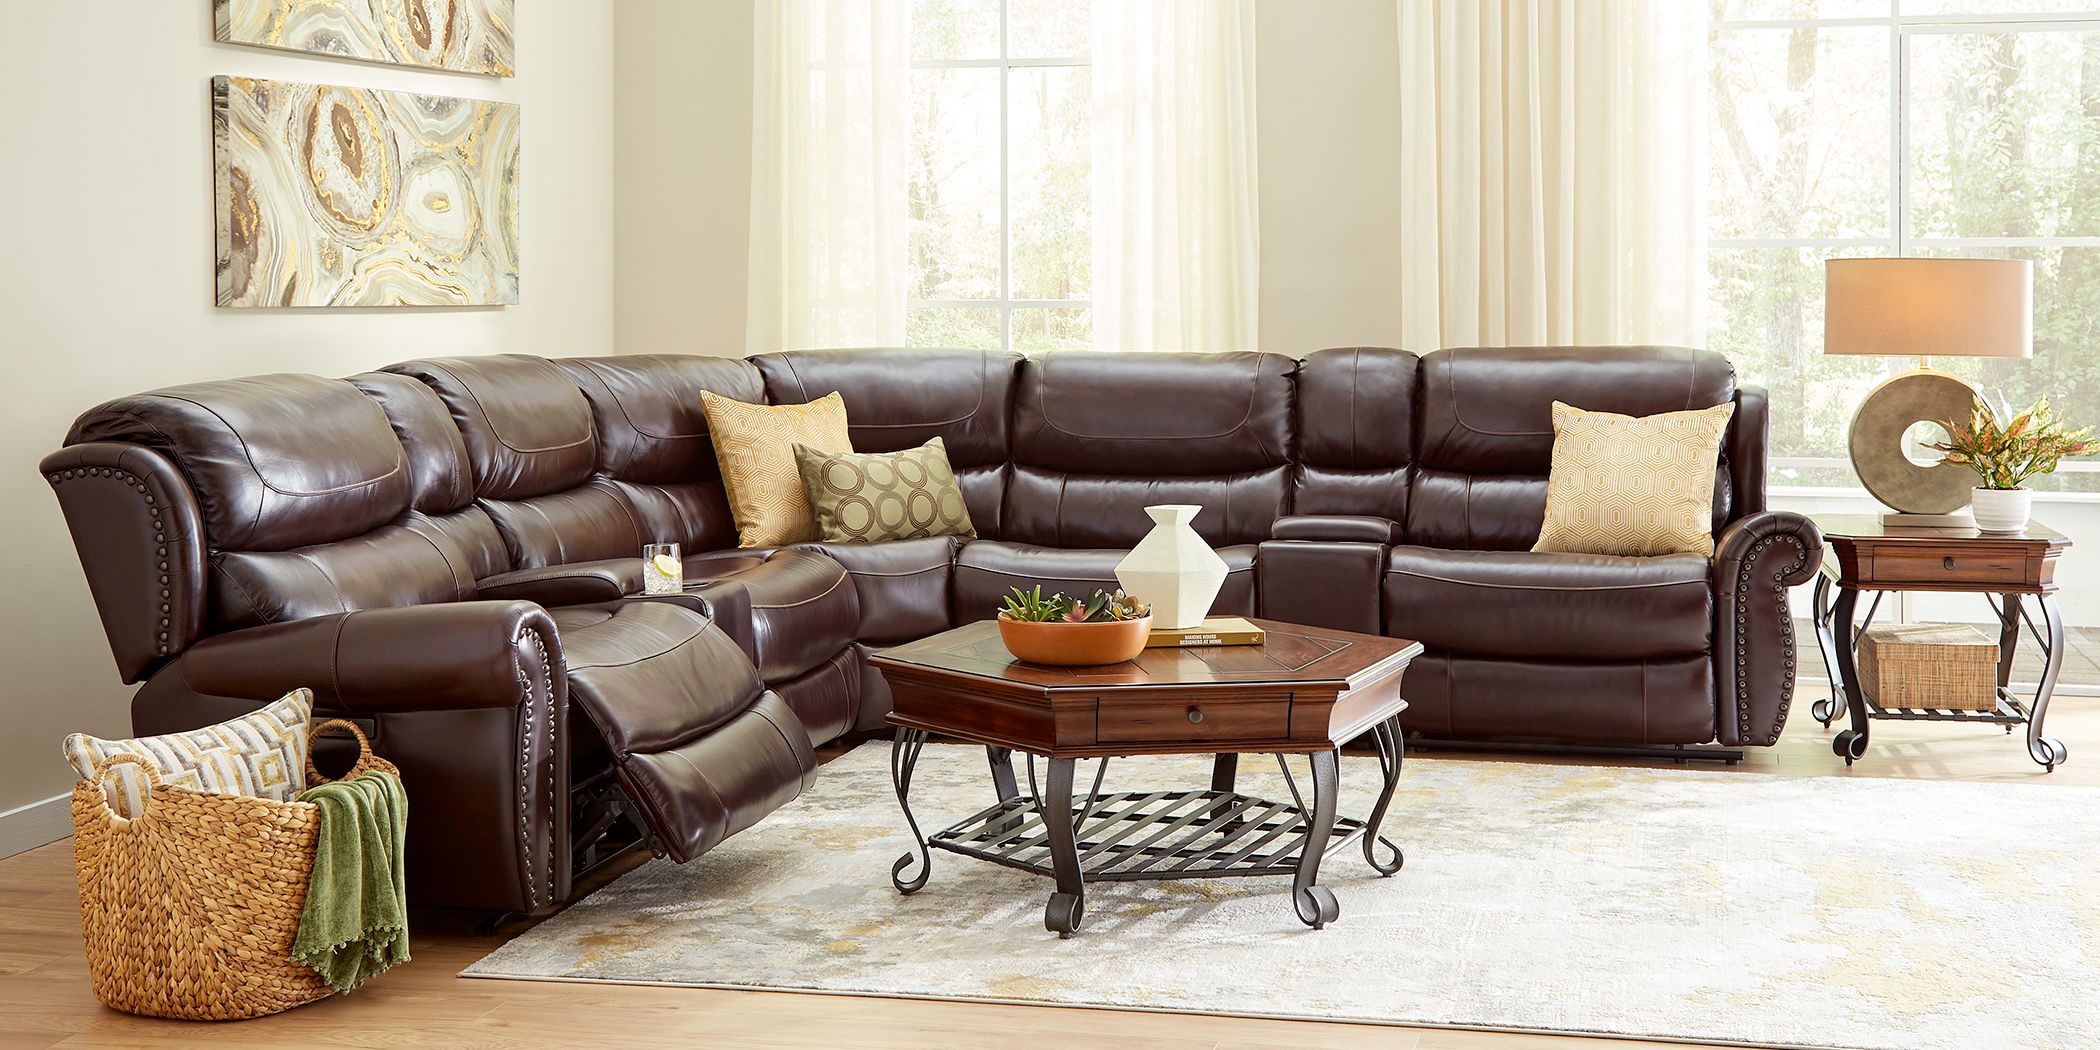 Venezio Brown Leather 7 Pc Dual Power Reclining Sectional 1271012P Image Room?cache Id=1cb4b27ac50f323c7a75a3530502d090